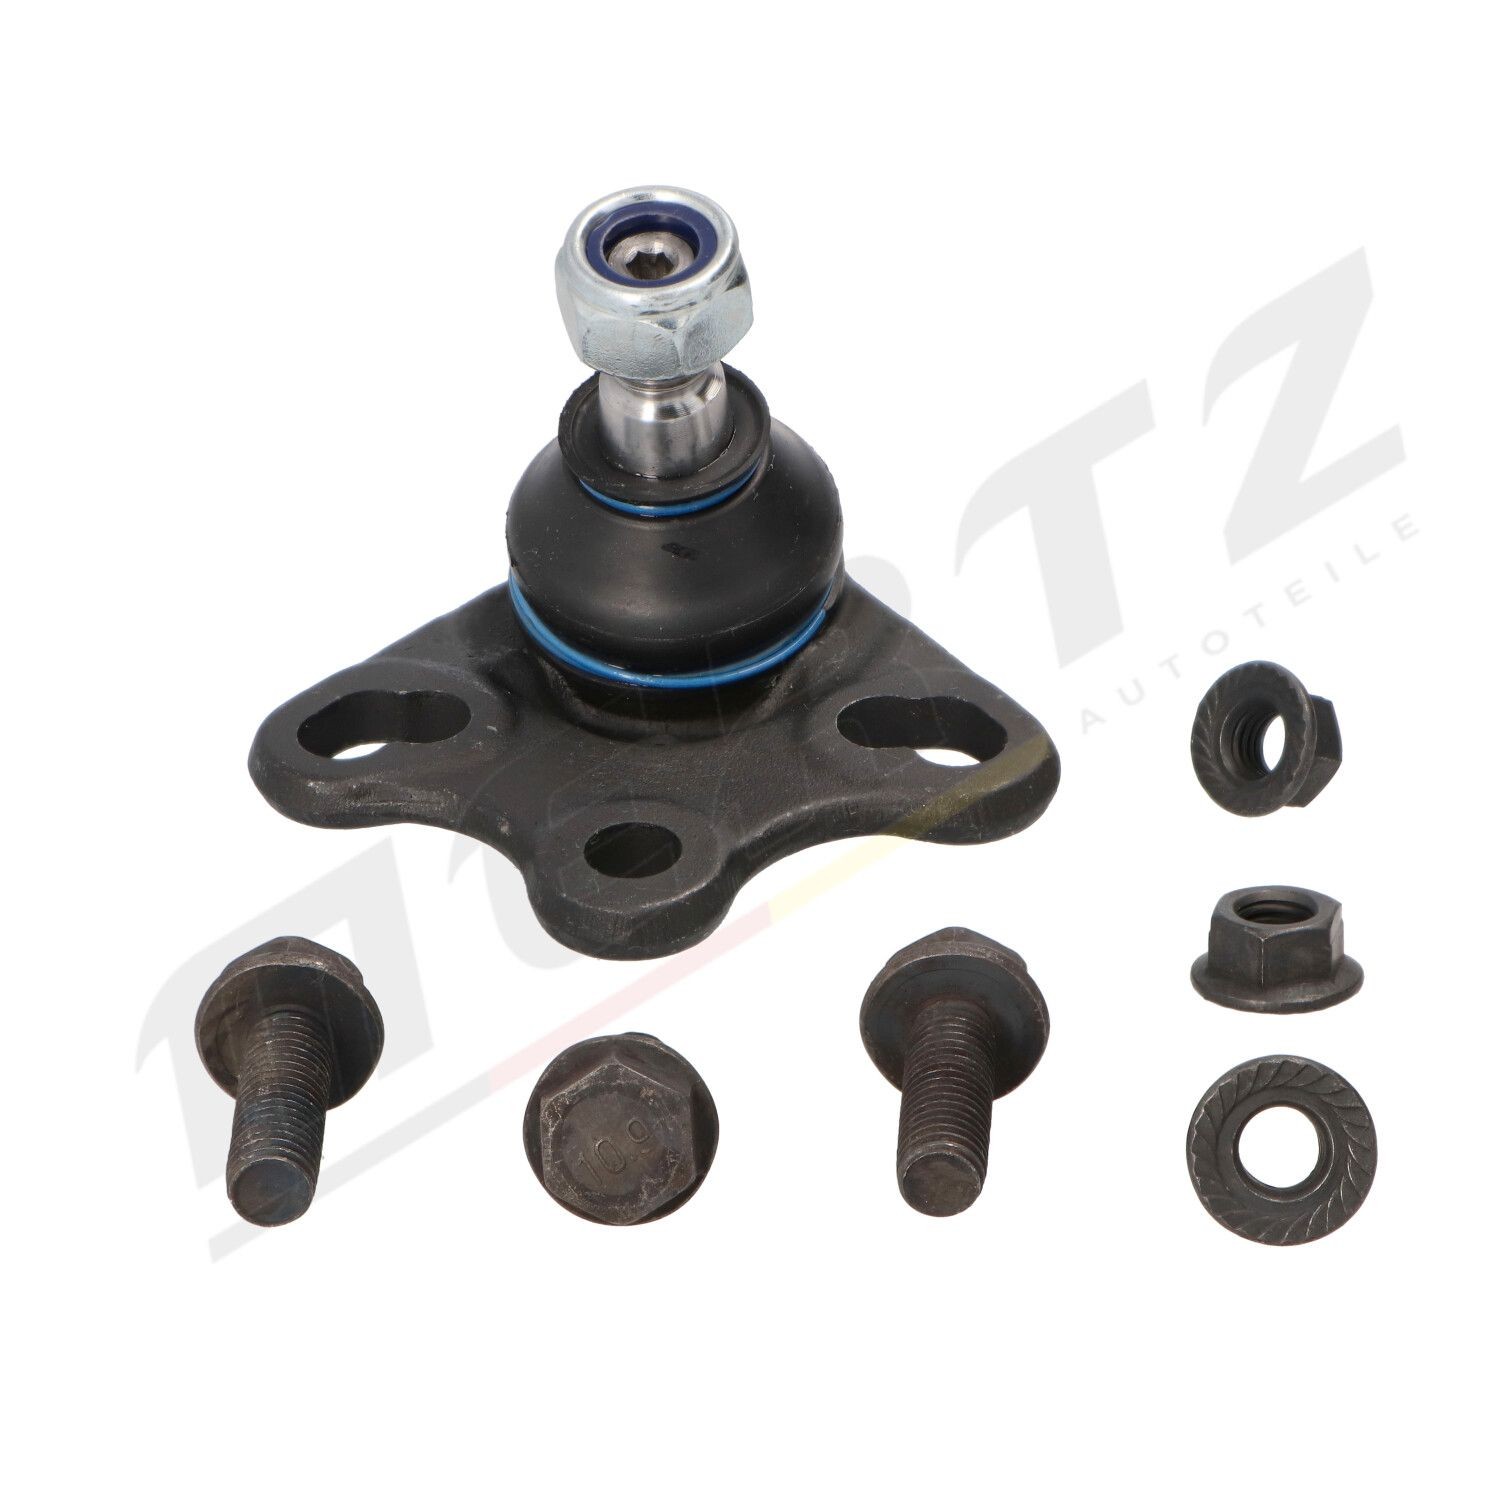 MERTZ M-S0056 Ball Joint Front Axle Left, Front Axle Right, with bolts/screws, with nut